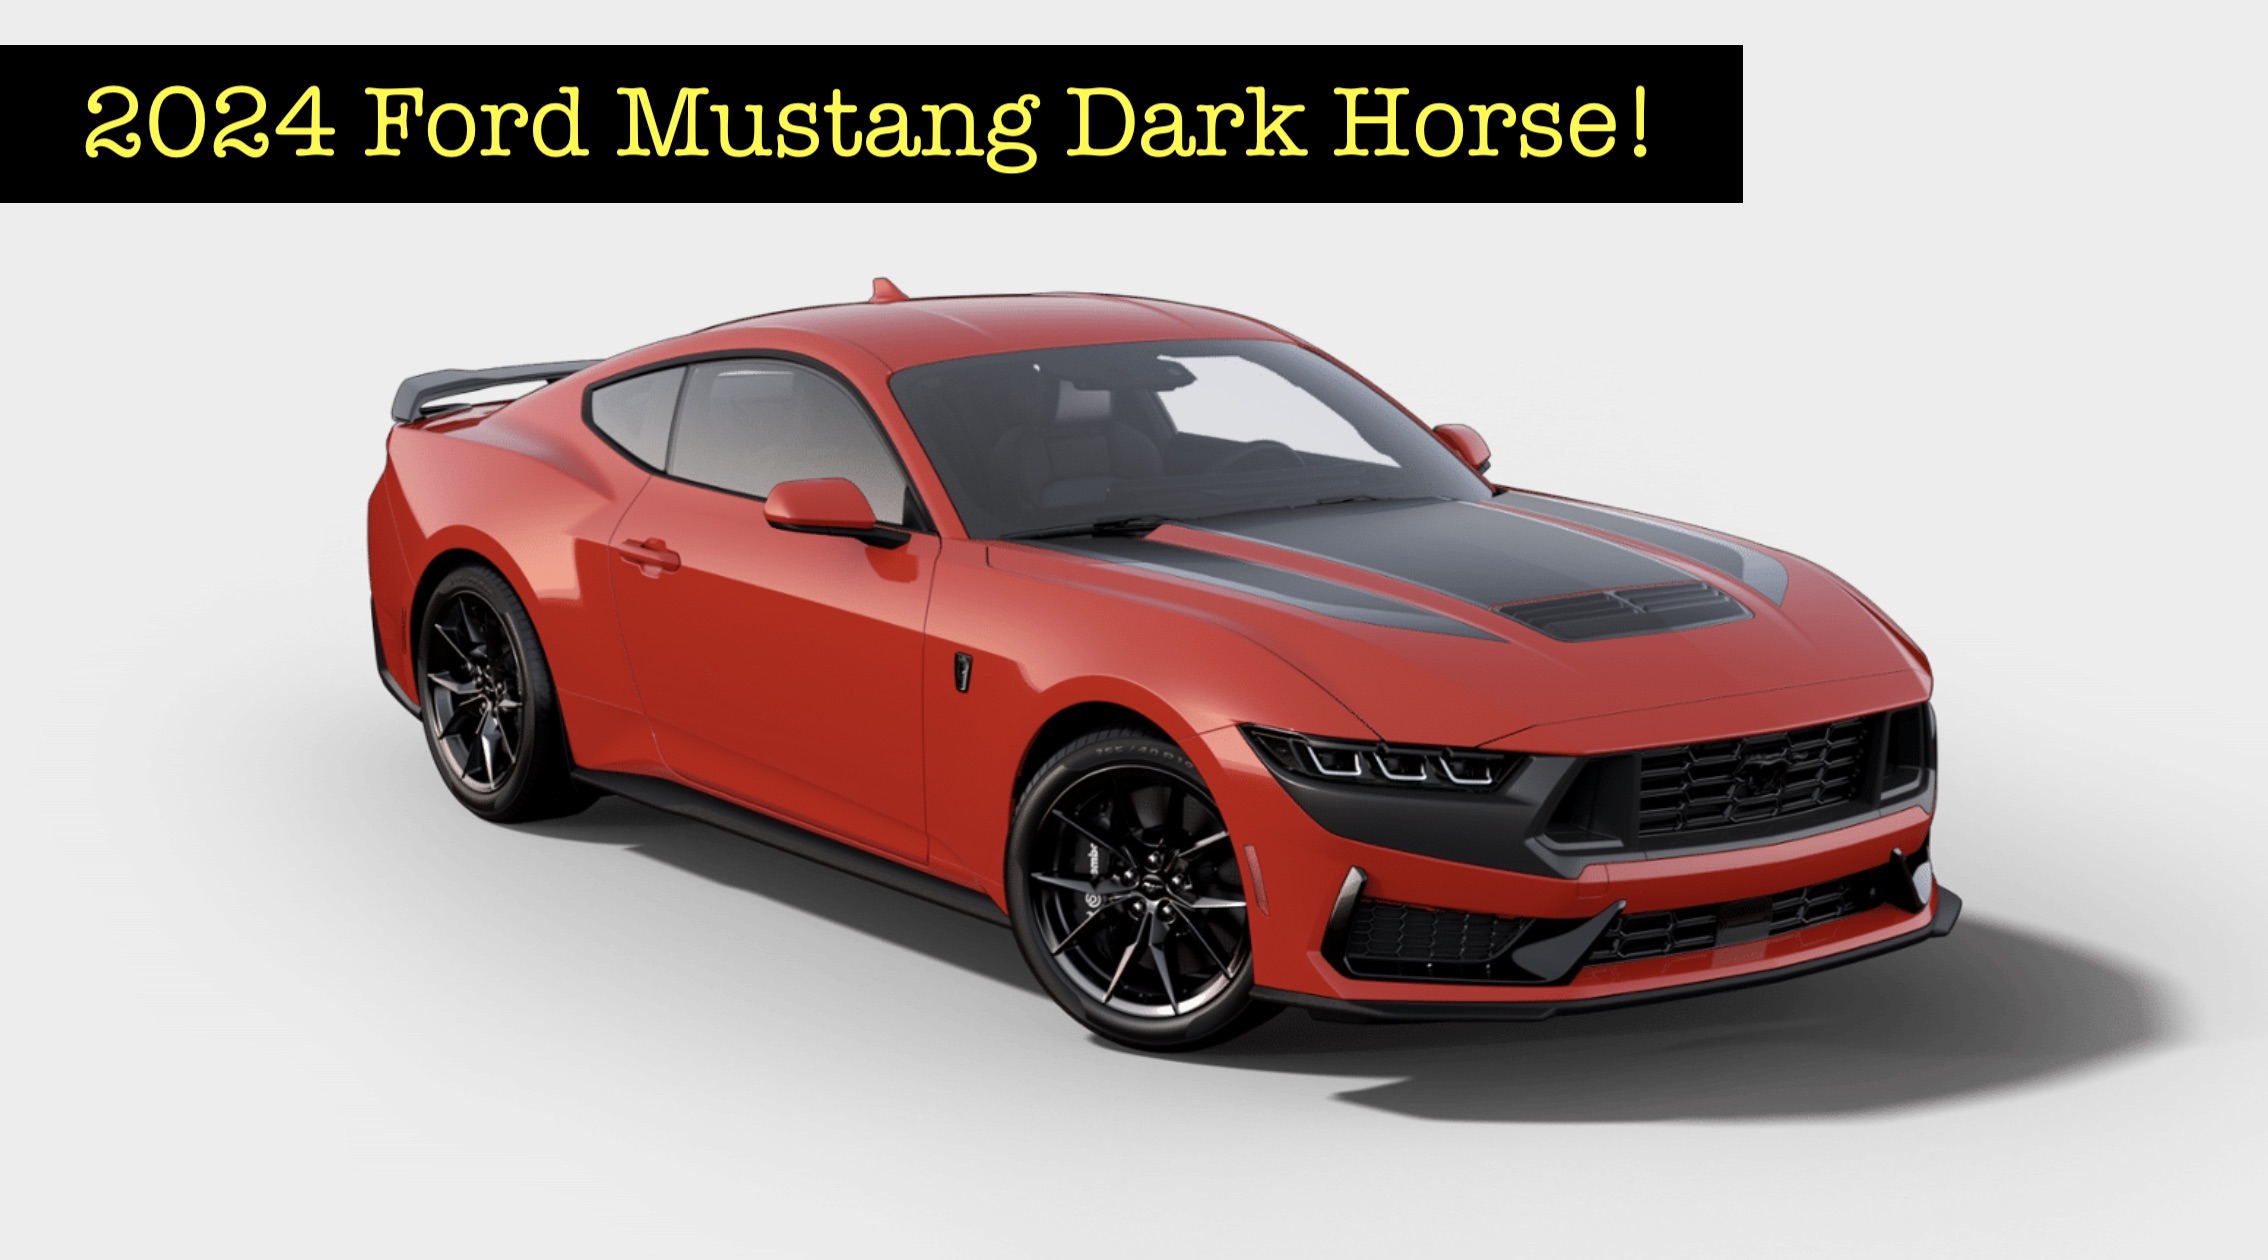 News: 2024 Ford Mustang Online Configurator Is Live! Check Out This